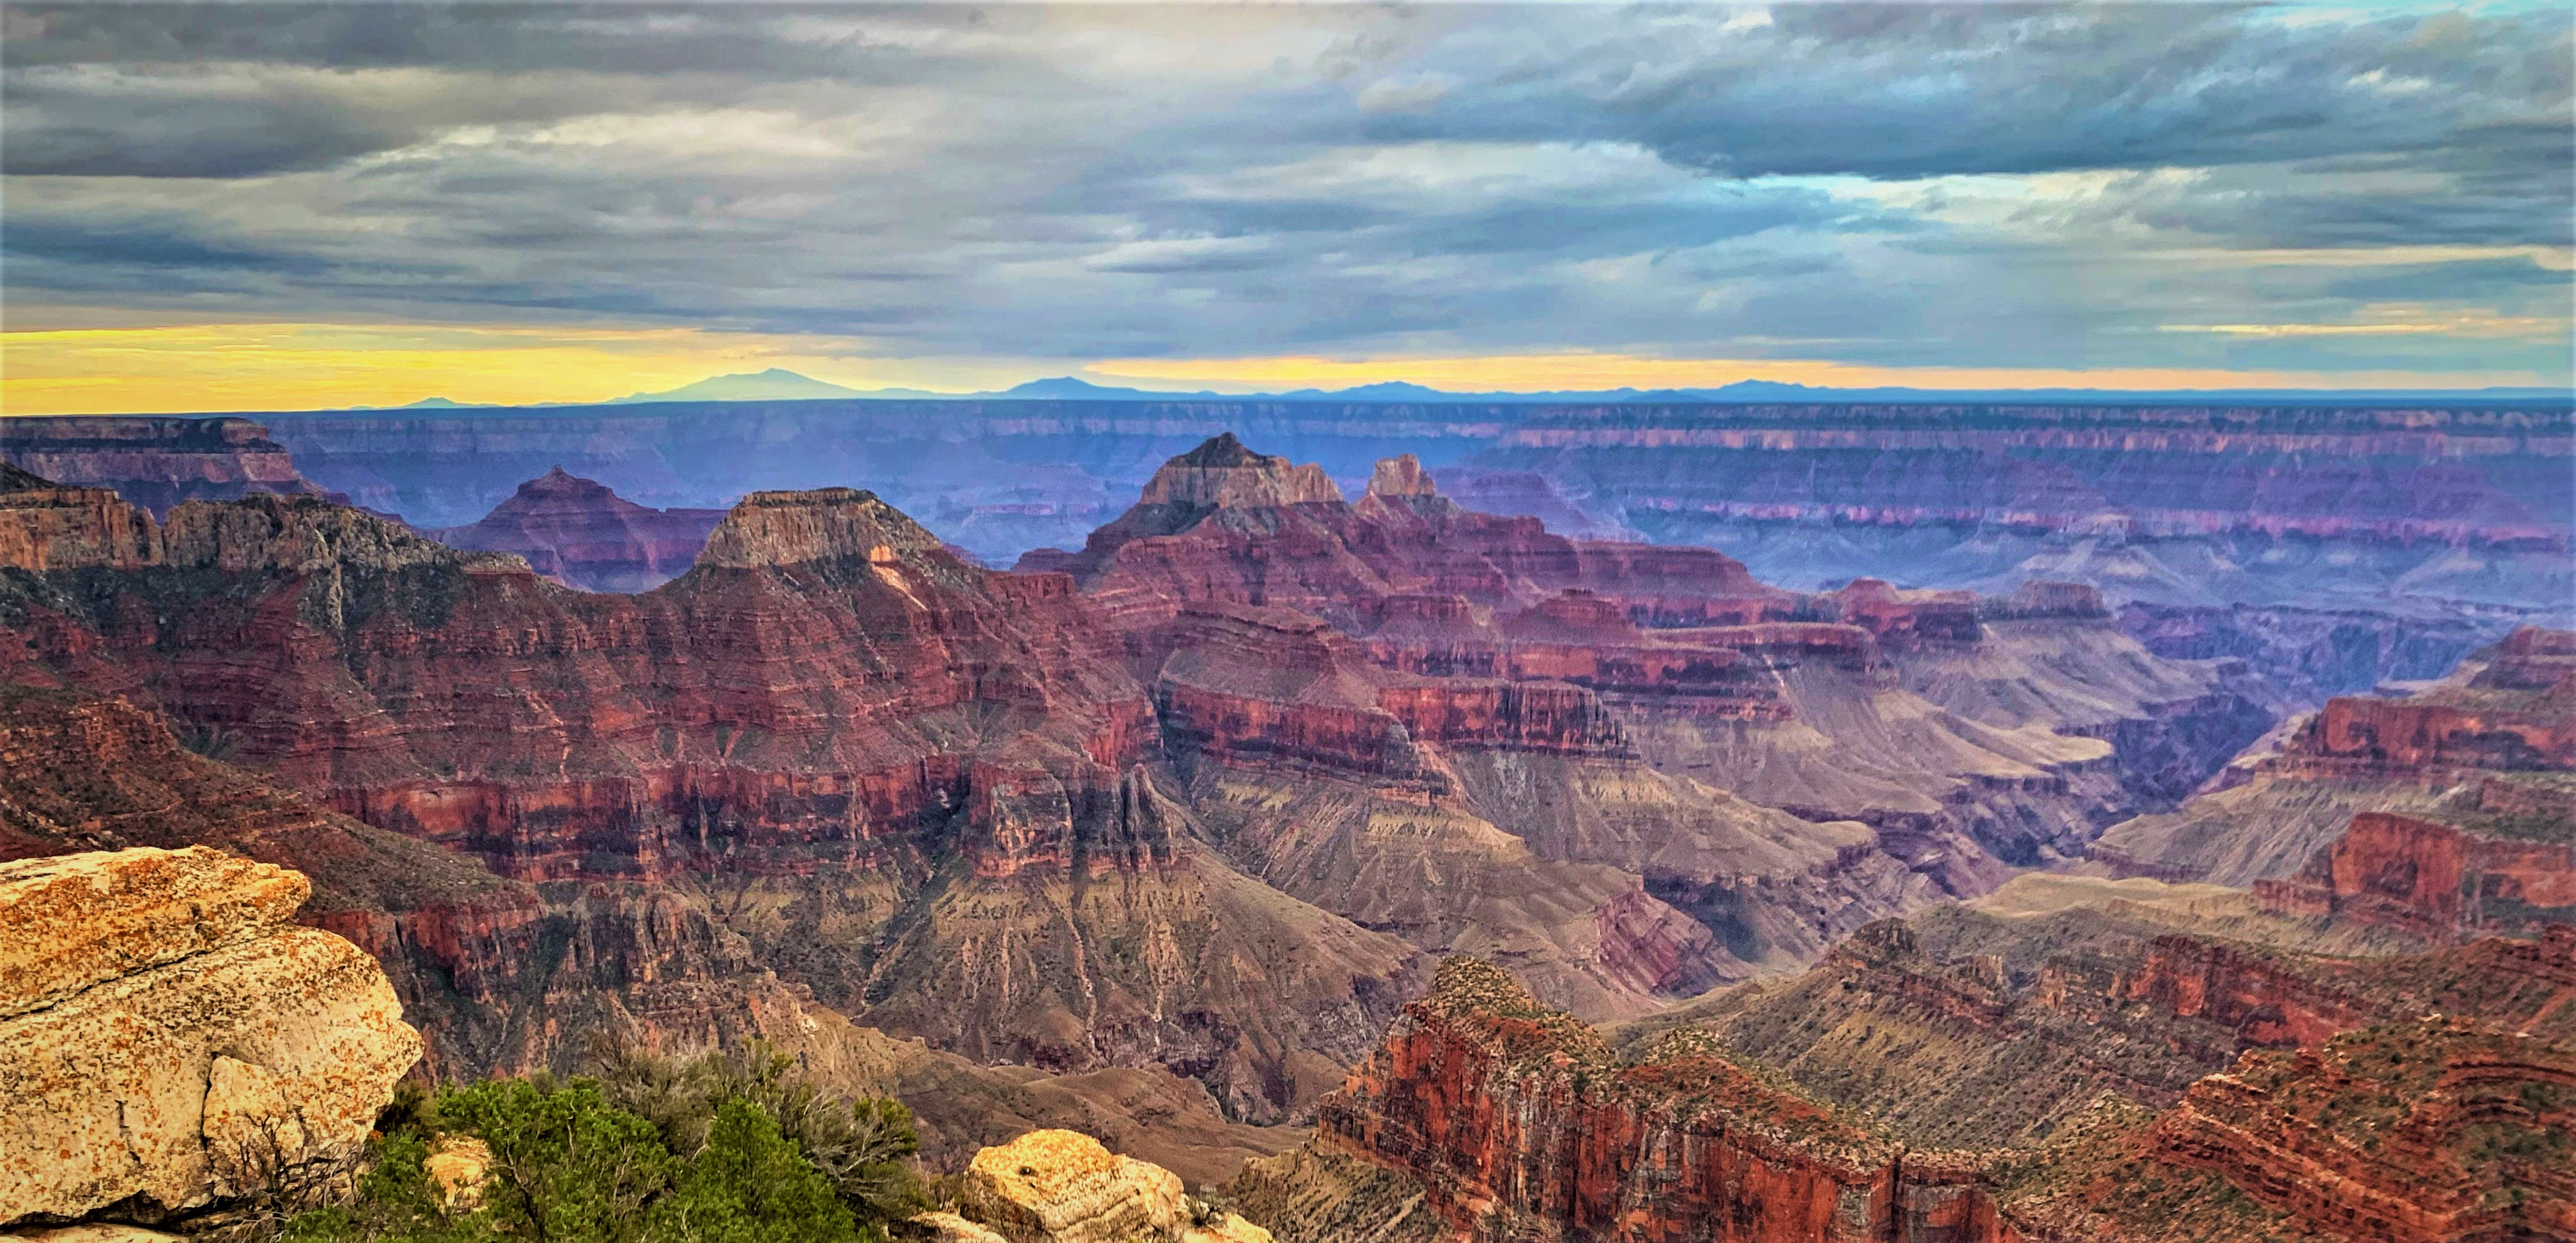 A colorful canyon landscape is seen at sunset from Bright Angel Point on the North Rim